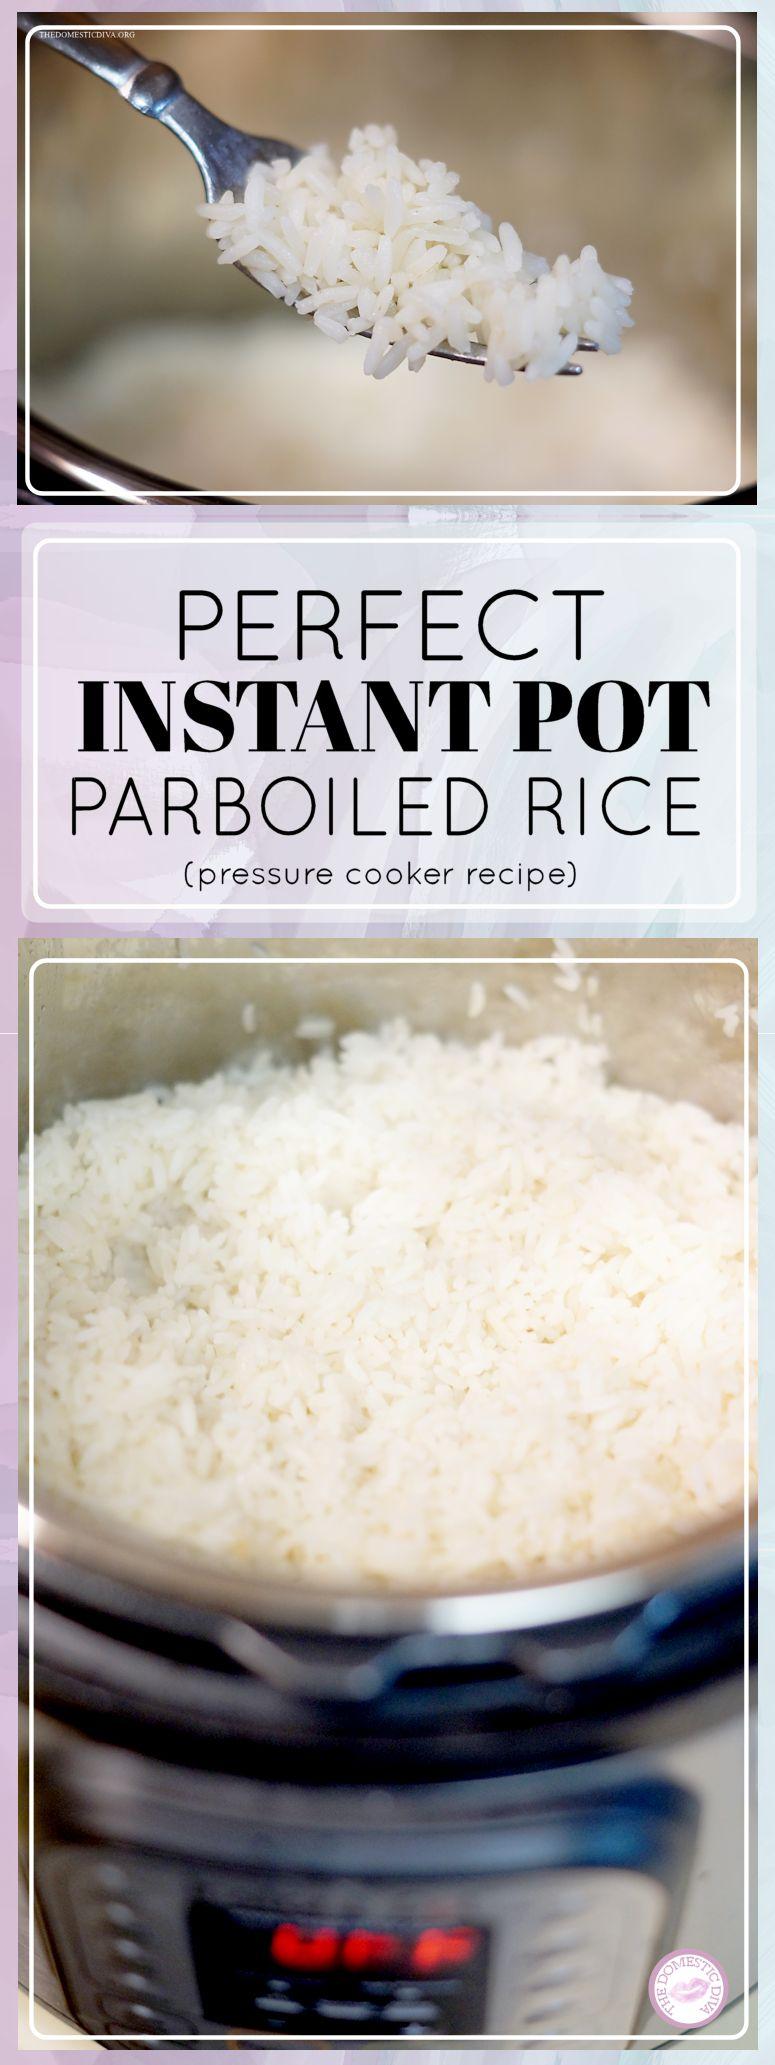 How to make perfect parboiled rice in an Instant Pot (pressure cooker recipe)